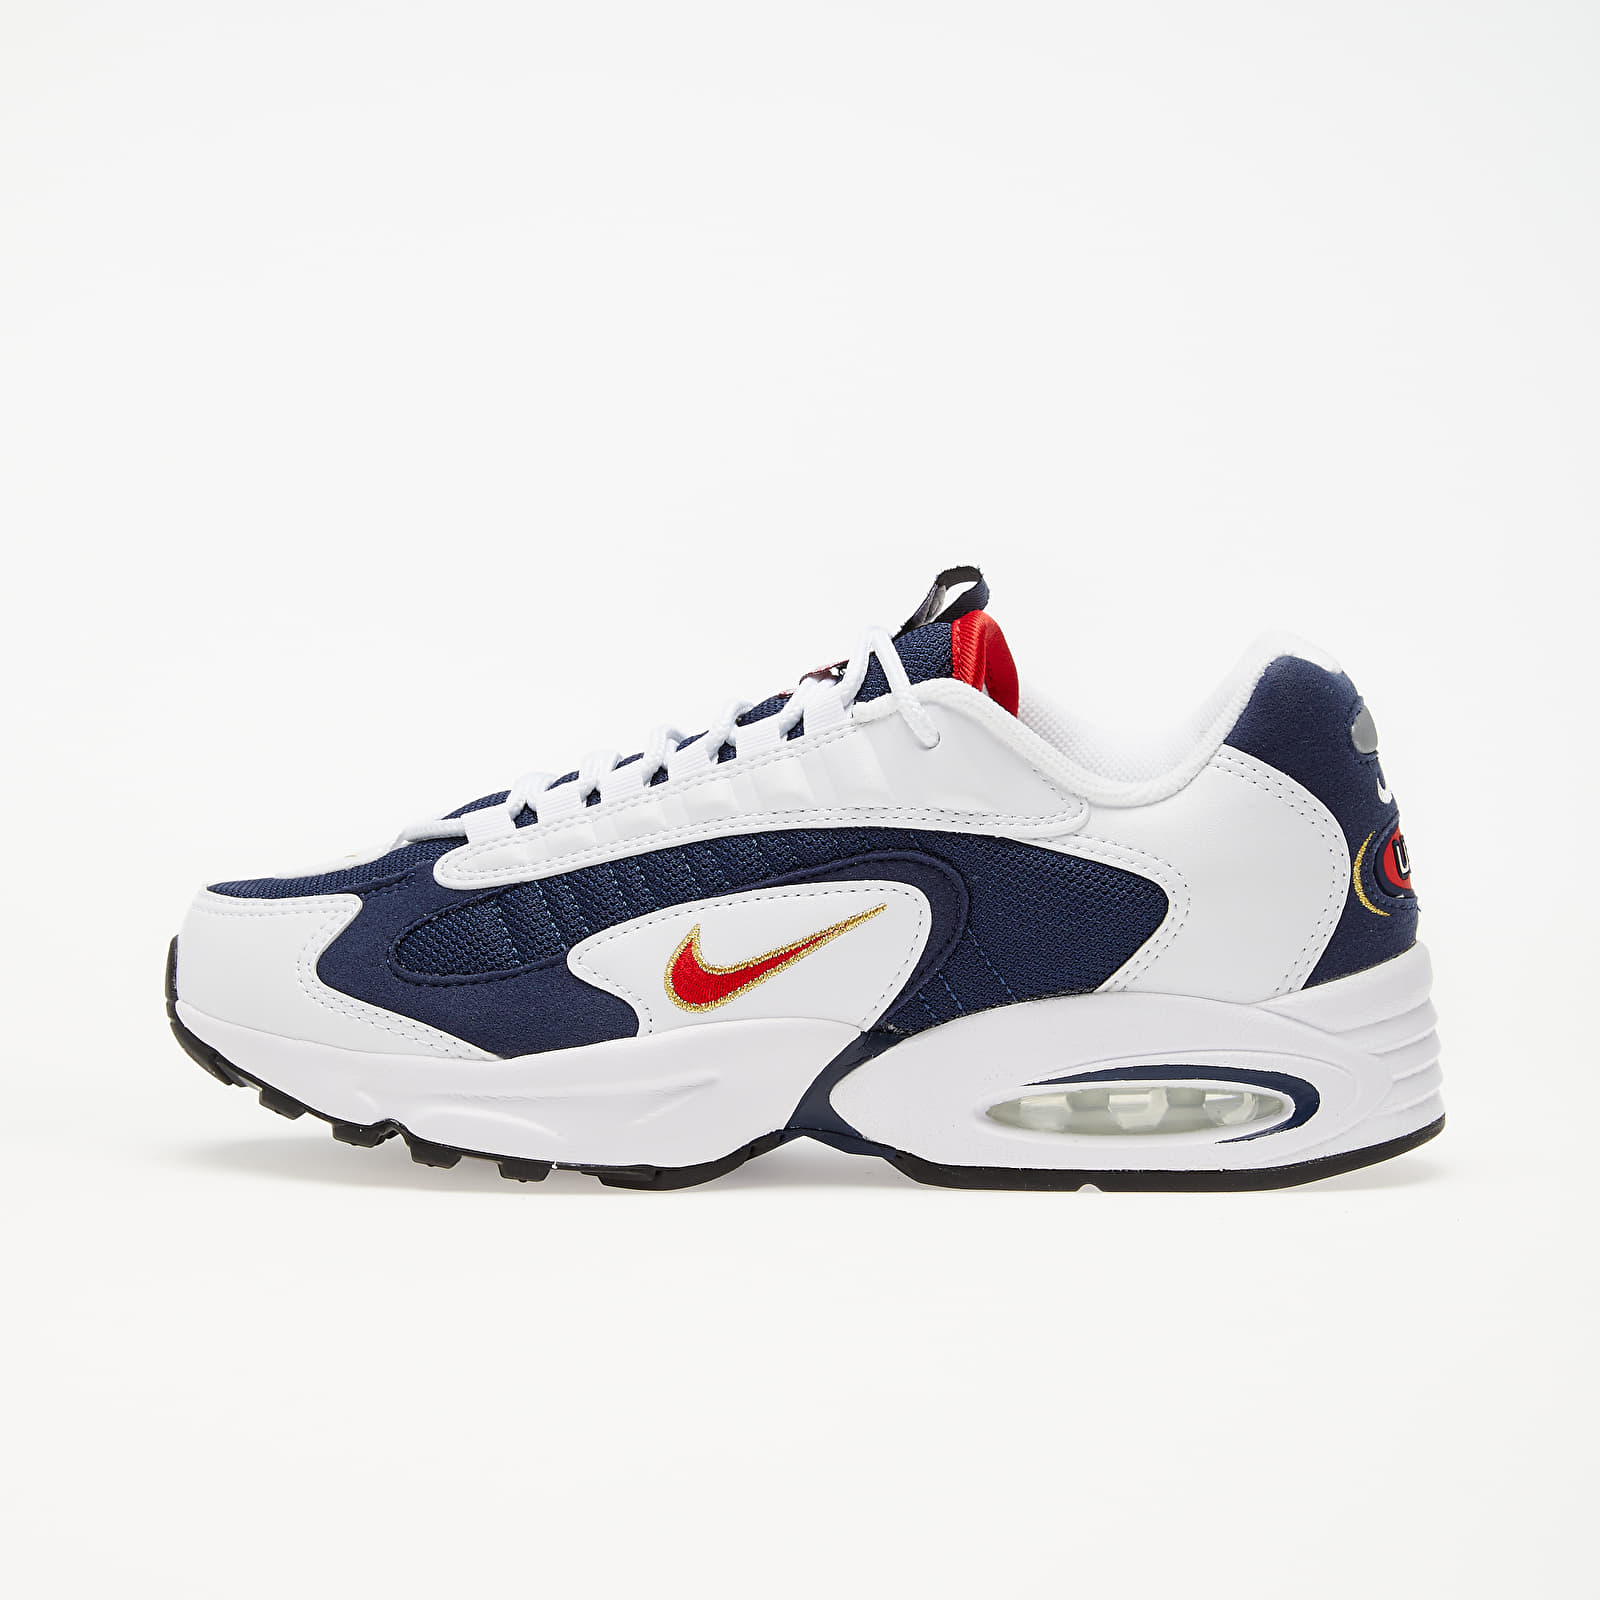 Men's shoes Nike Air Max Triax Usa Midnight Navy/ University Red-White